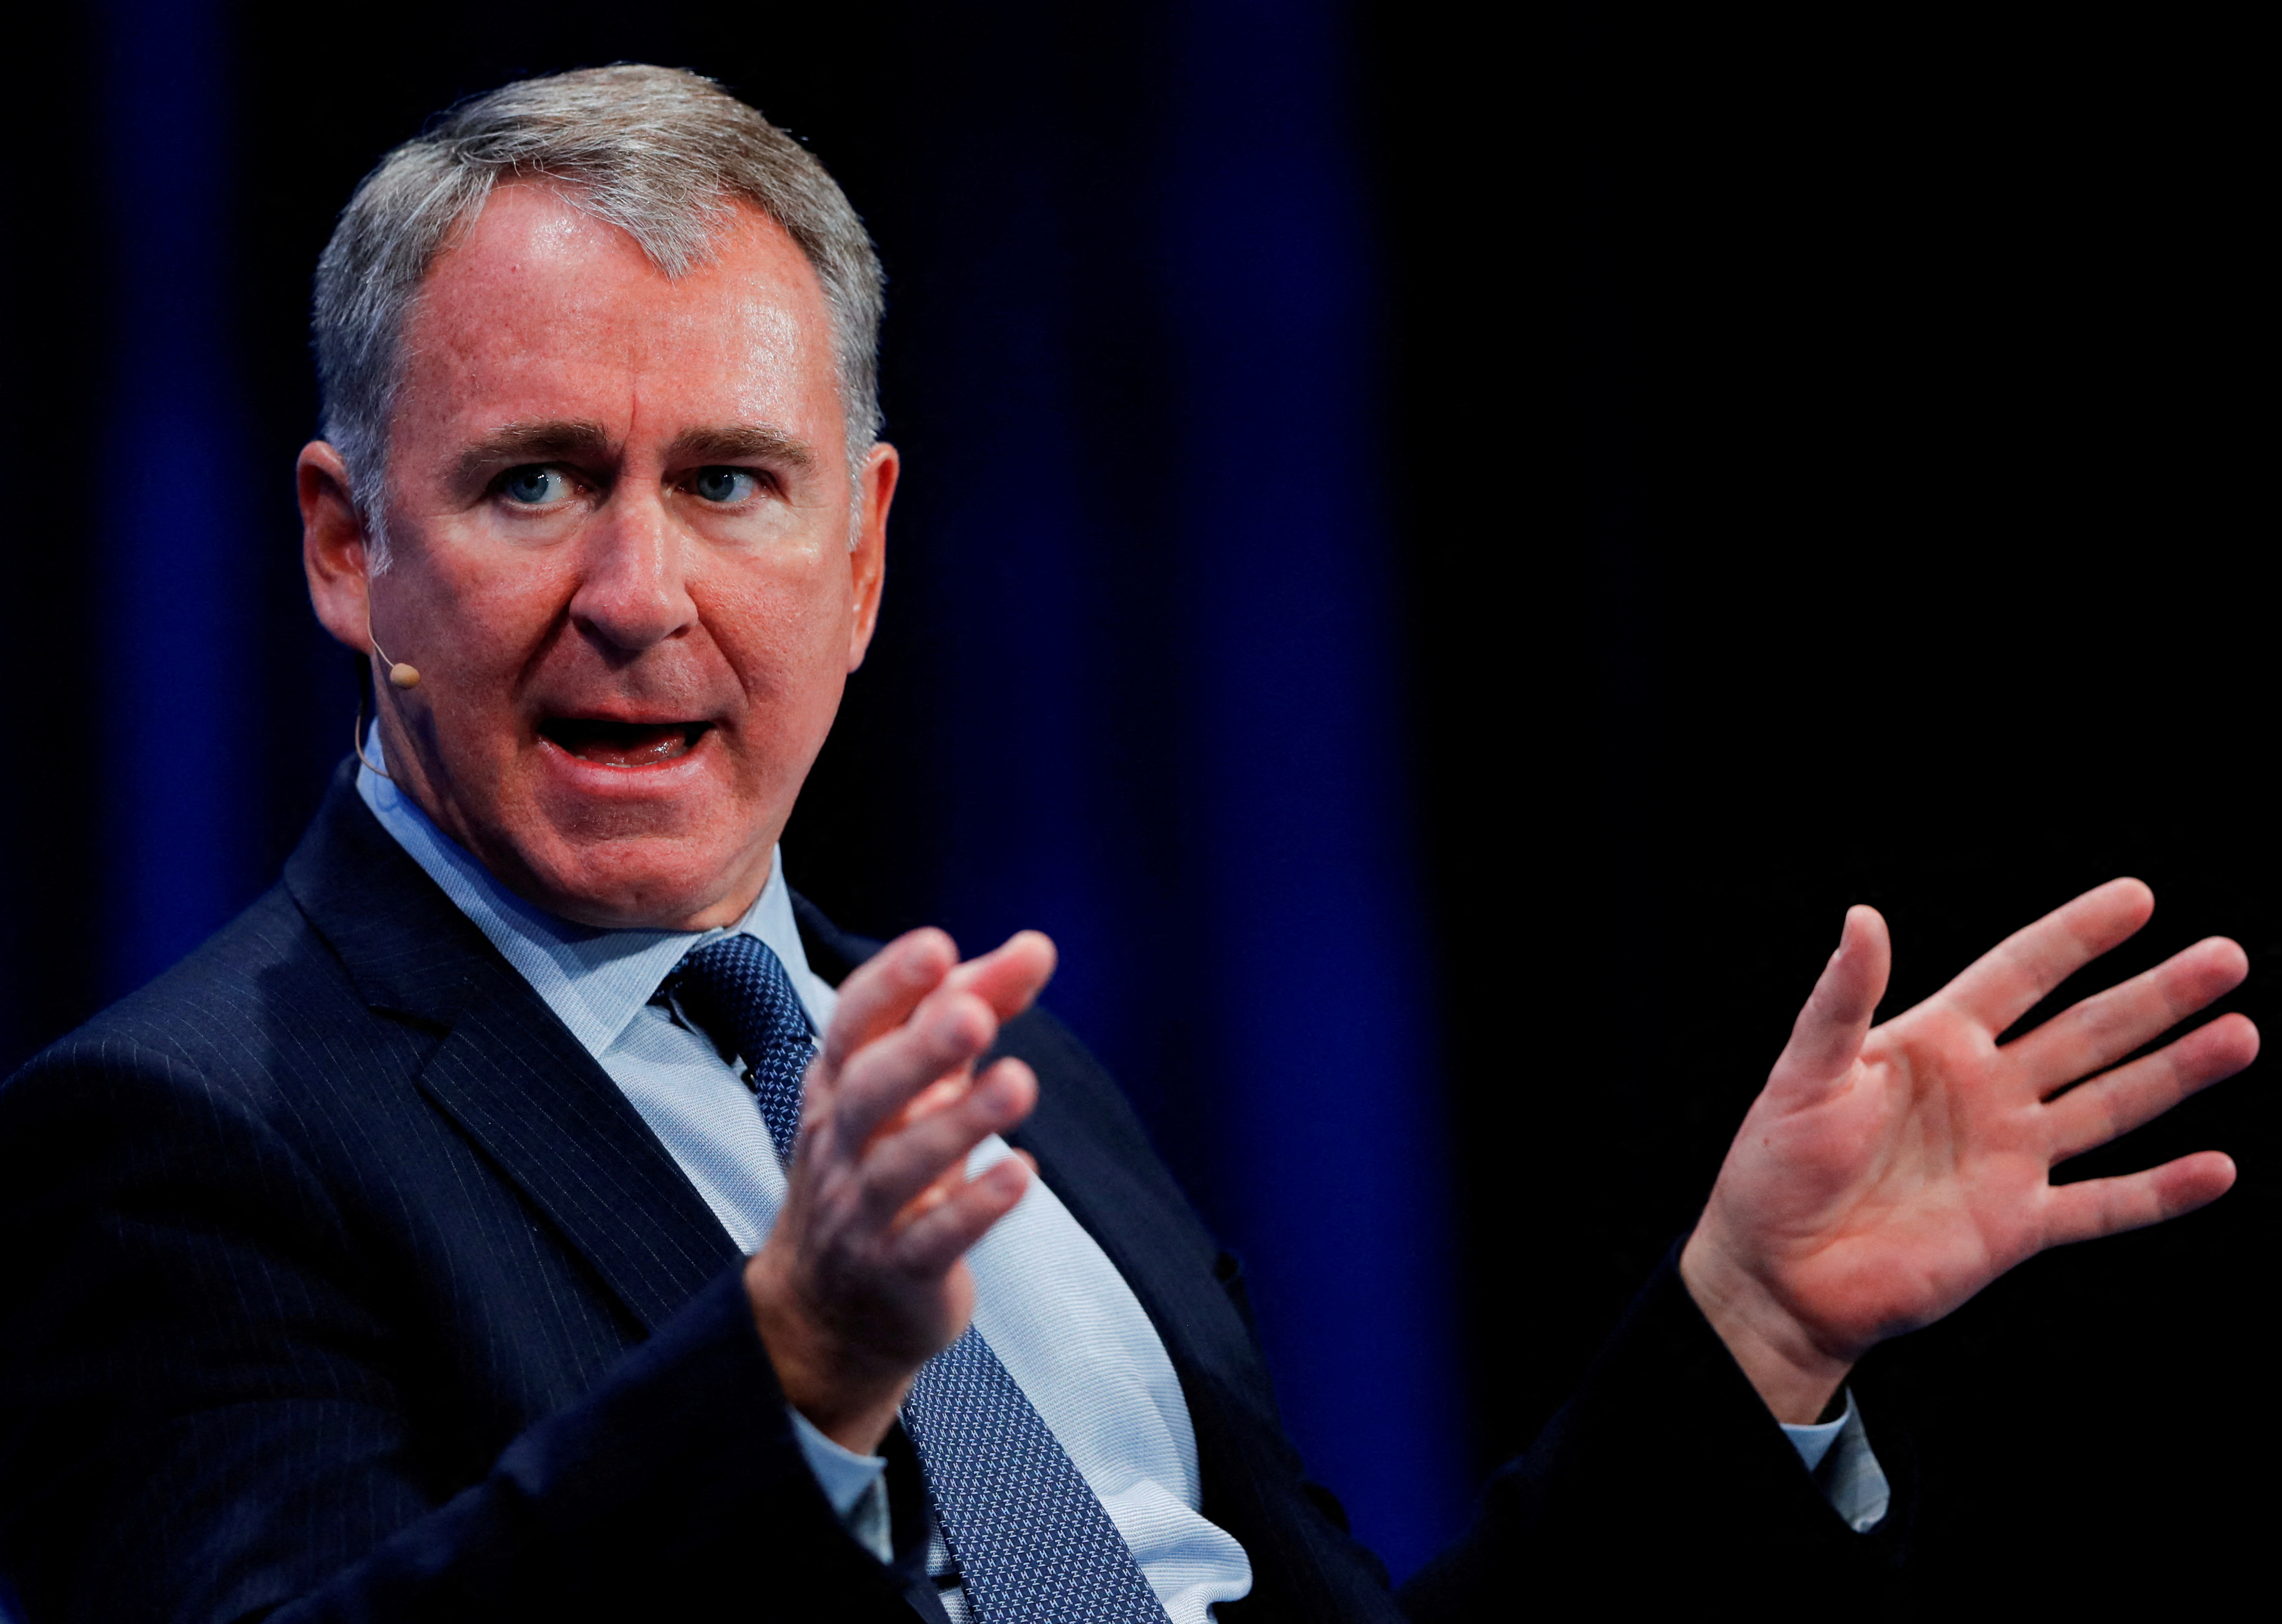 Ken Griffin, Founder and CEO, Citadel, speaks during the Milken Institute's 22nd annual Global Conference in Beverly Hills, California